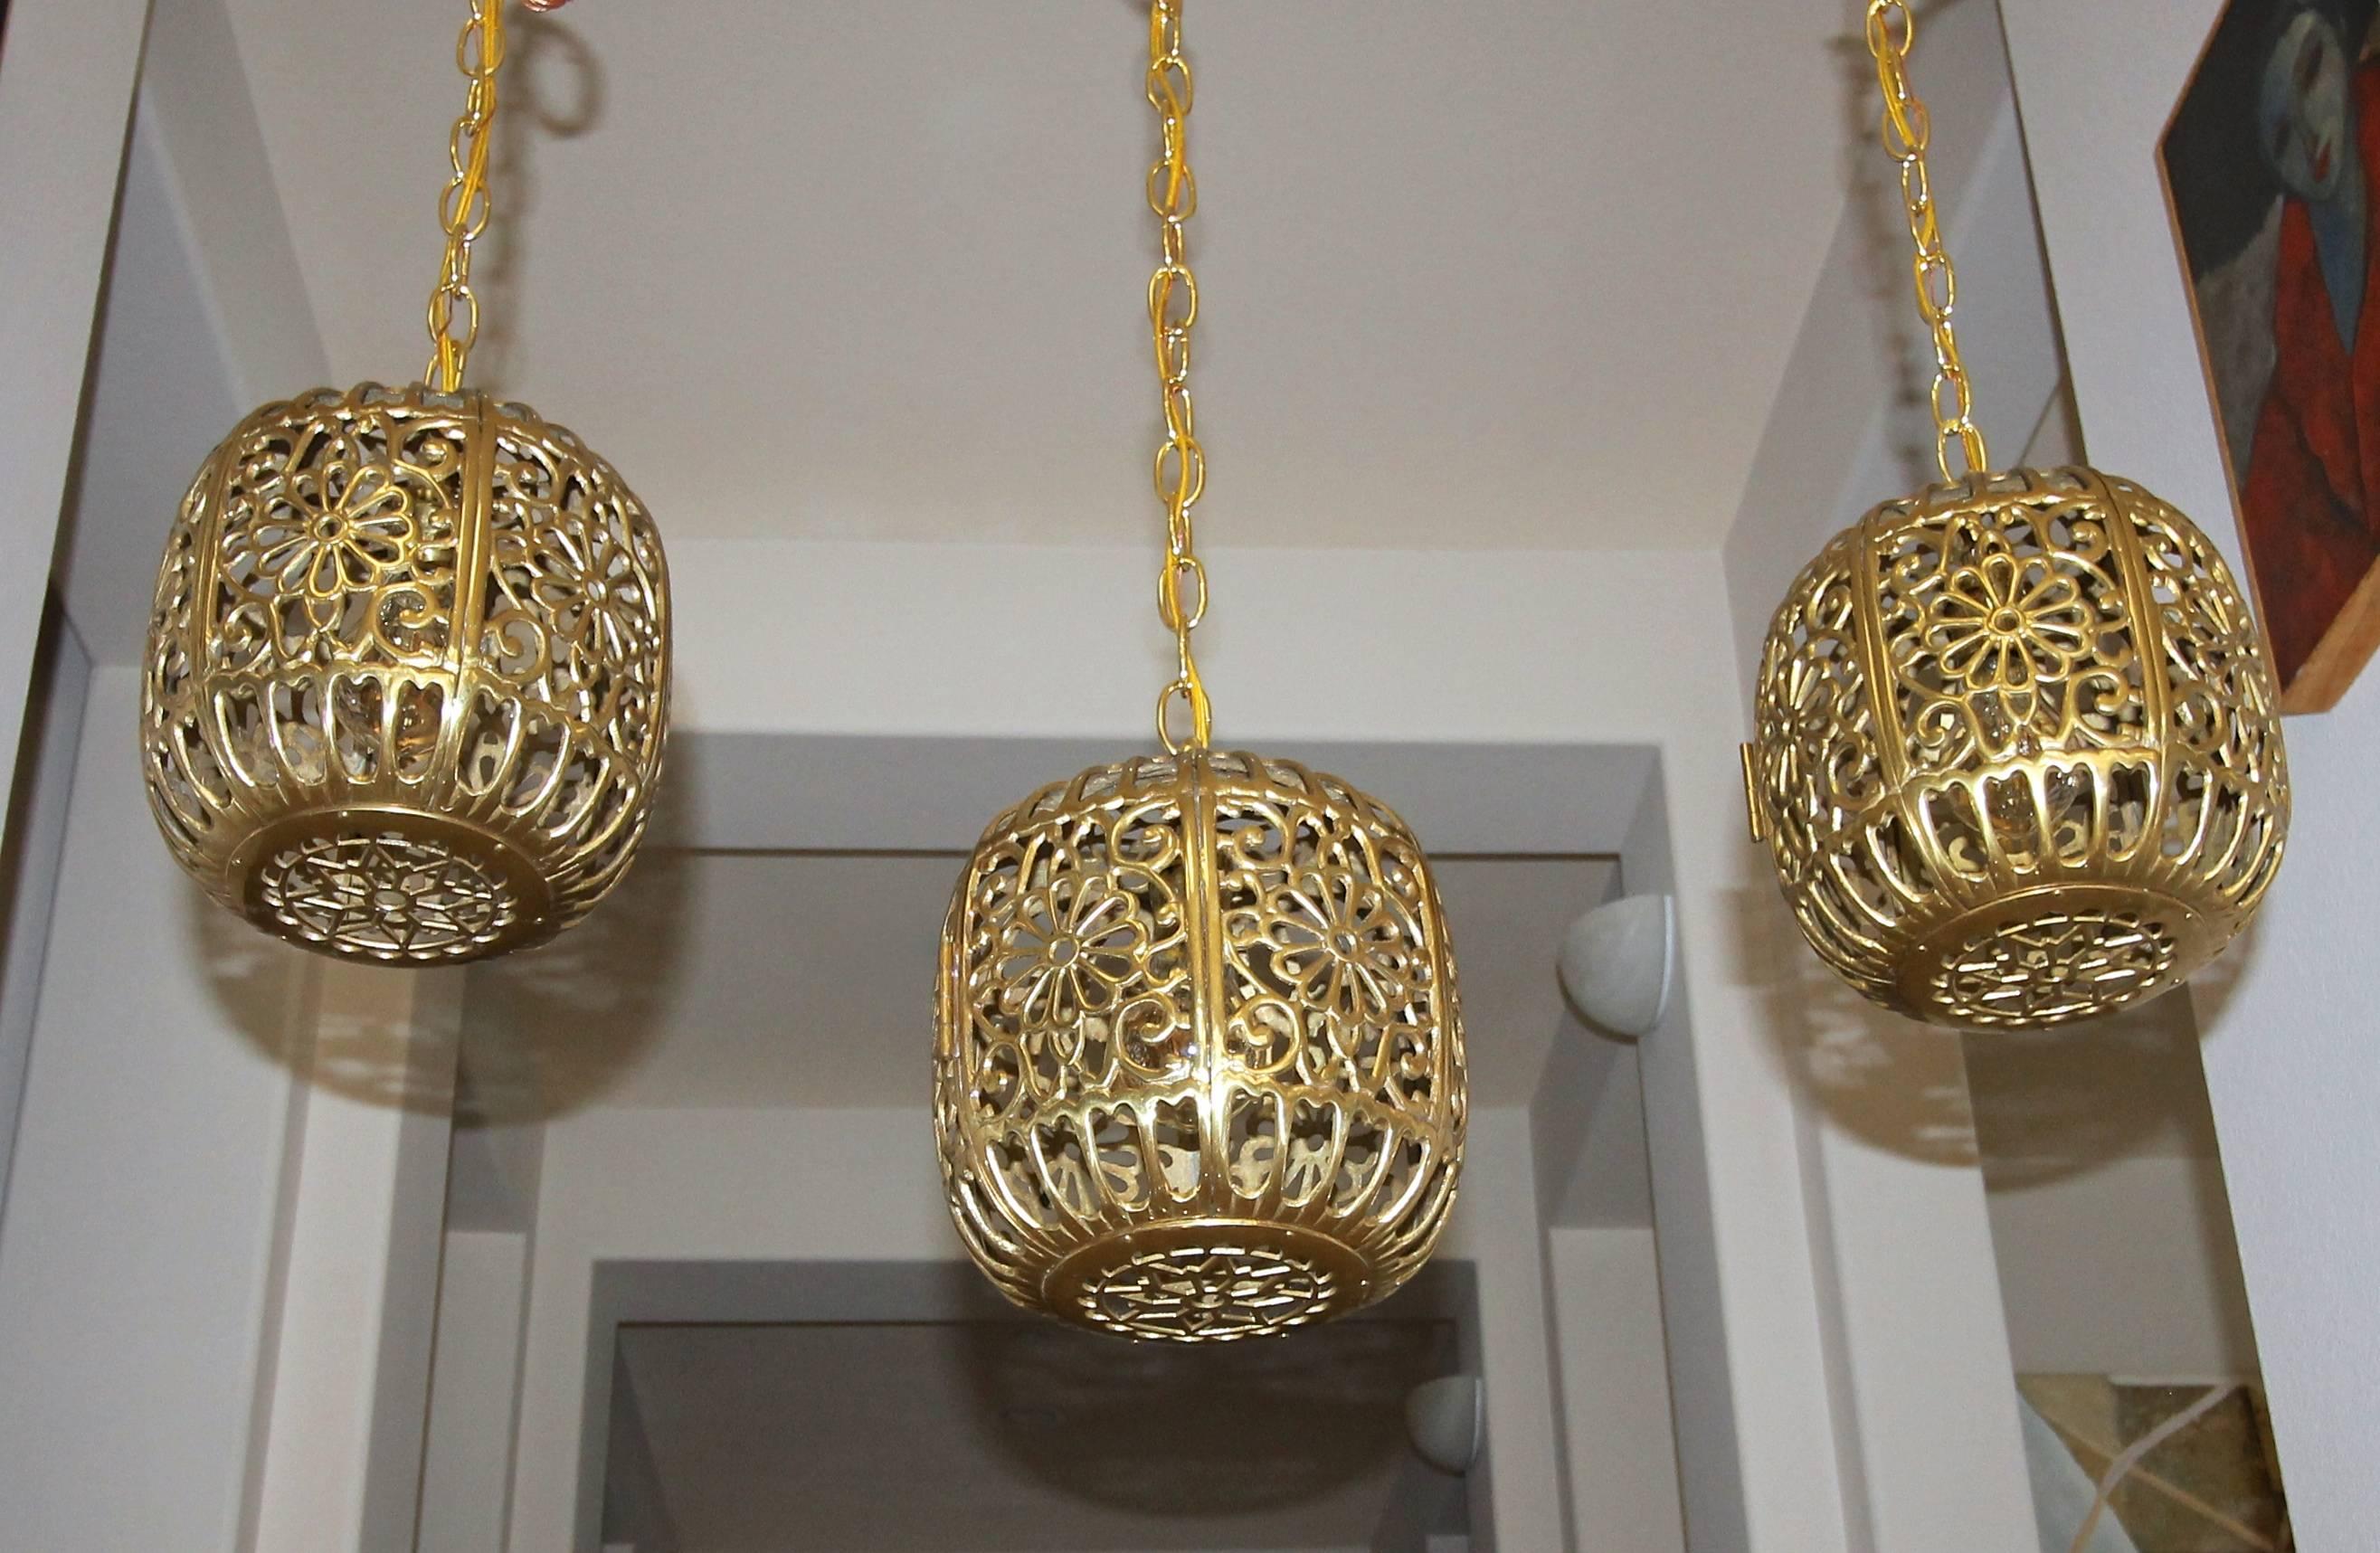 Trio (3) of high quality Asian pierced brass pendant ceiling lights. This fixture creates a playful pattern on walls and ceilings when lit. Newly wired with new hardware including socket, chain and ceiling cap. Each uses single regular A-base bulb.